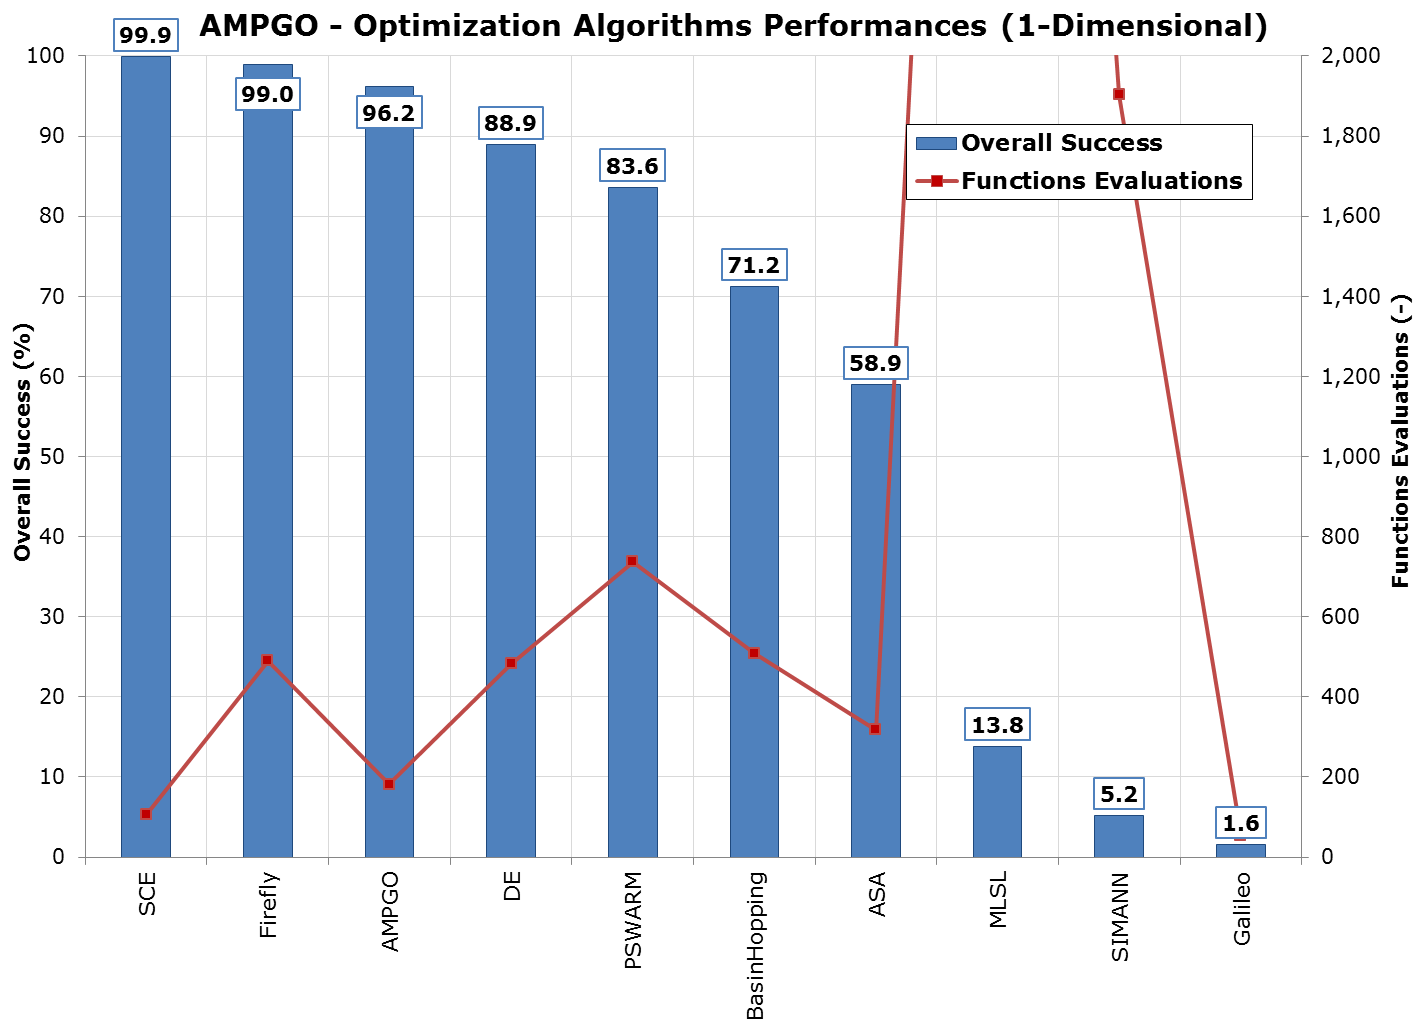 AMPGO 1-D results